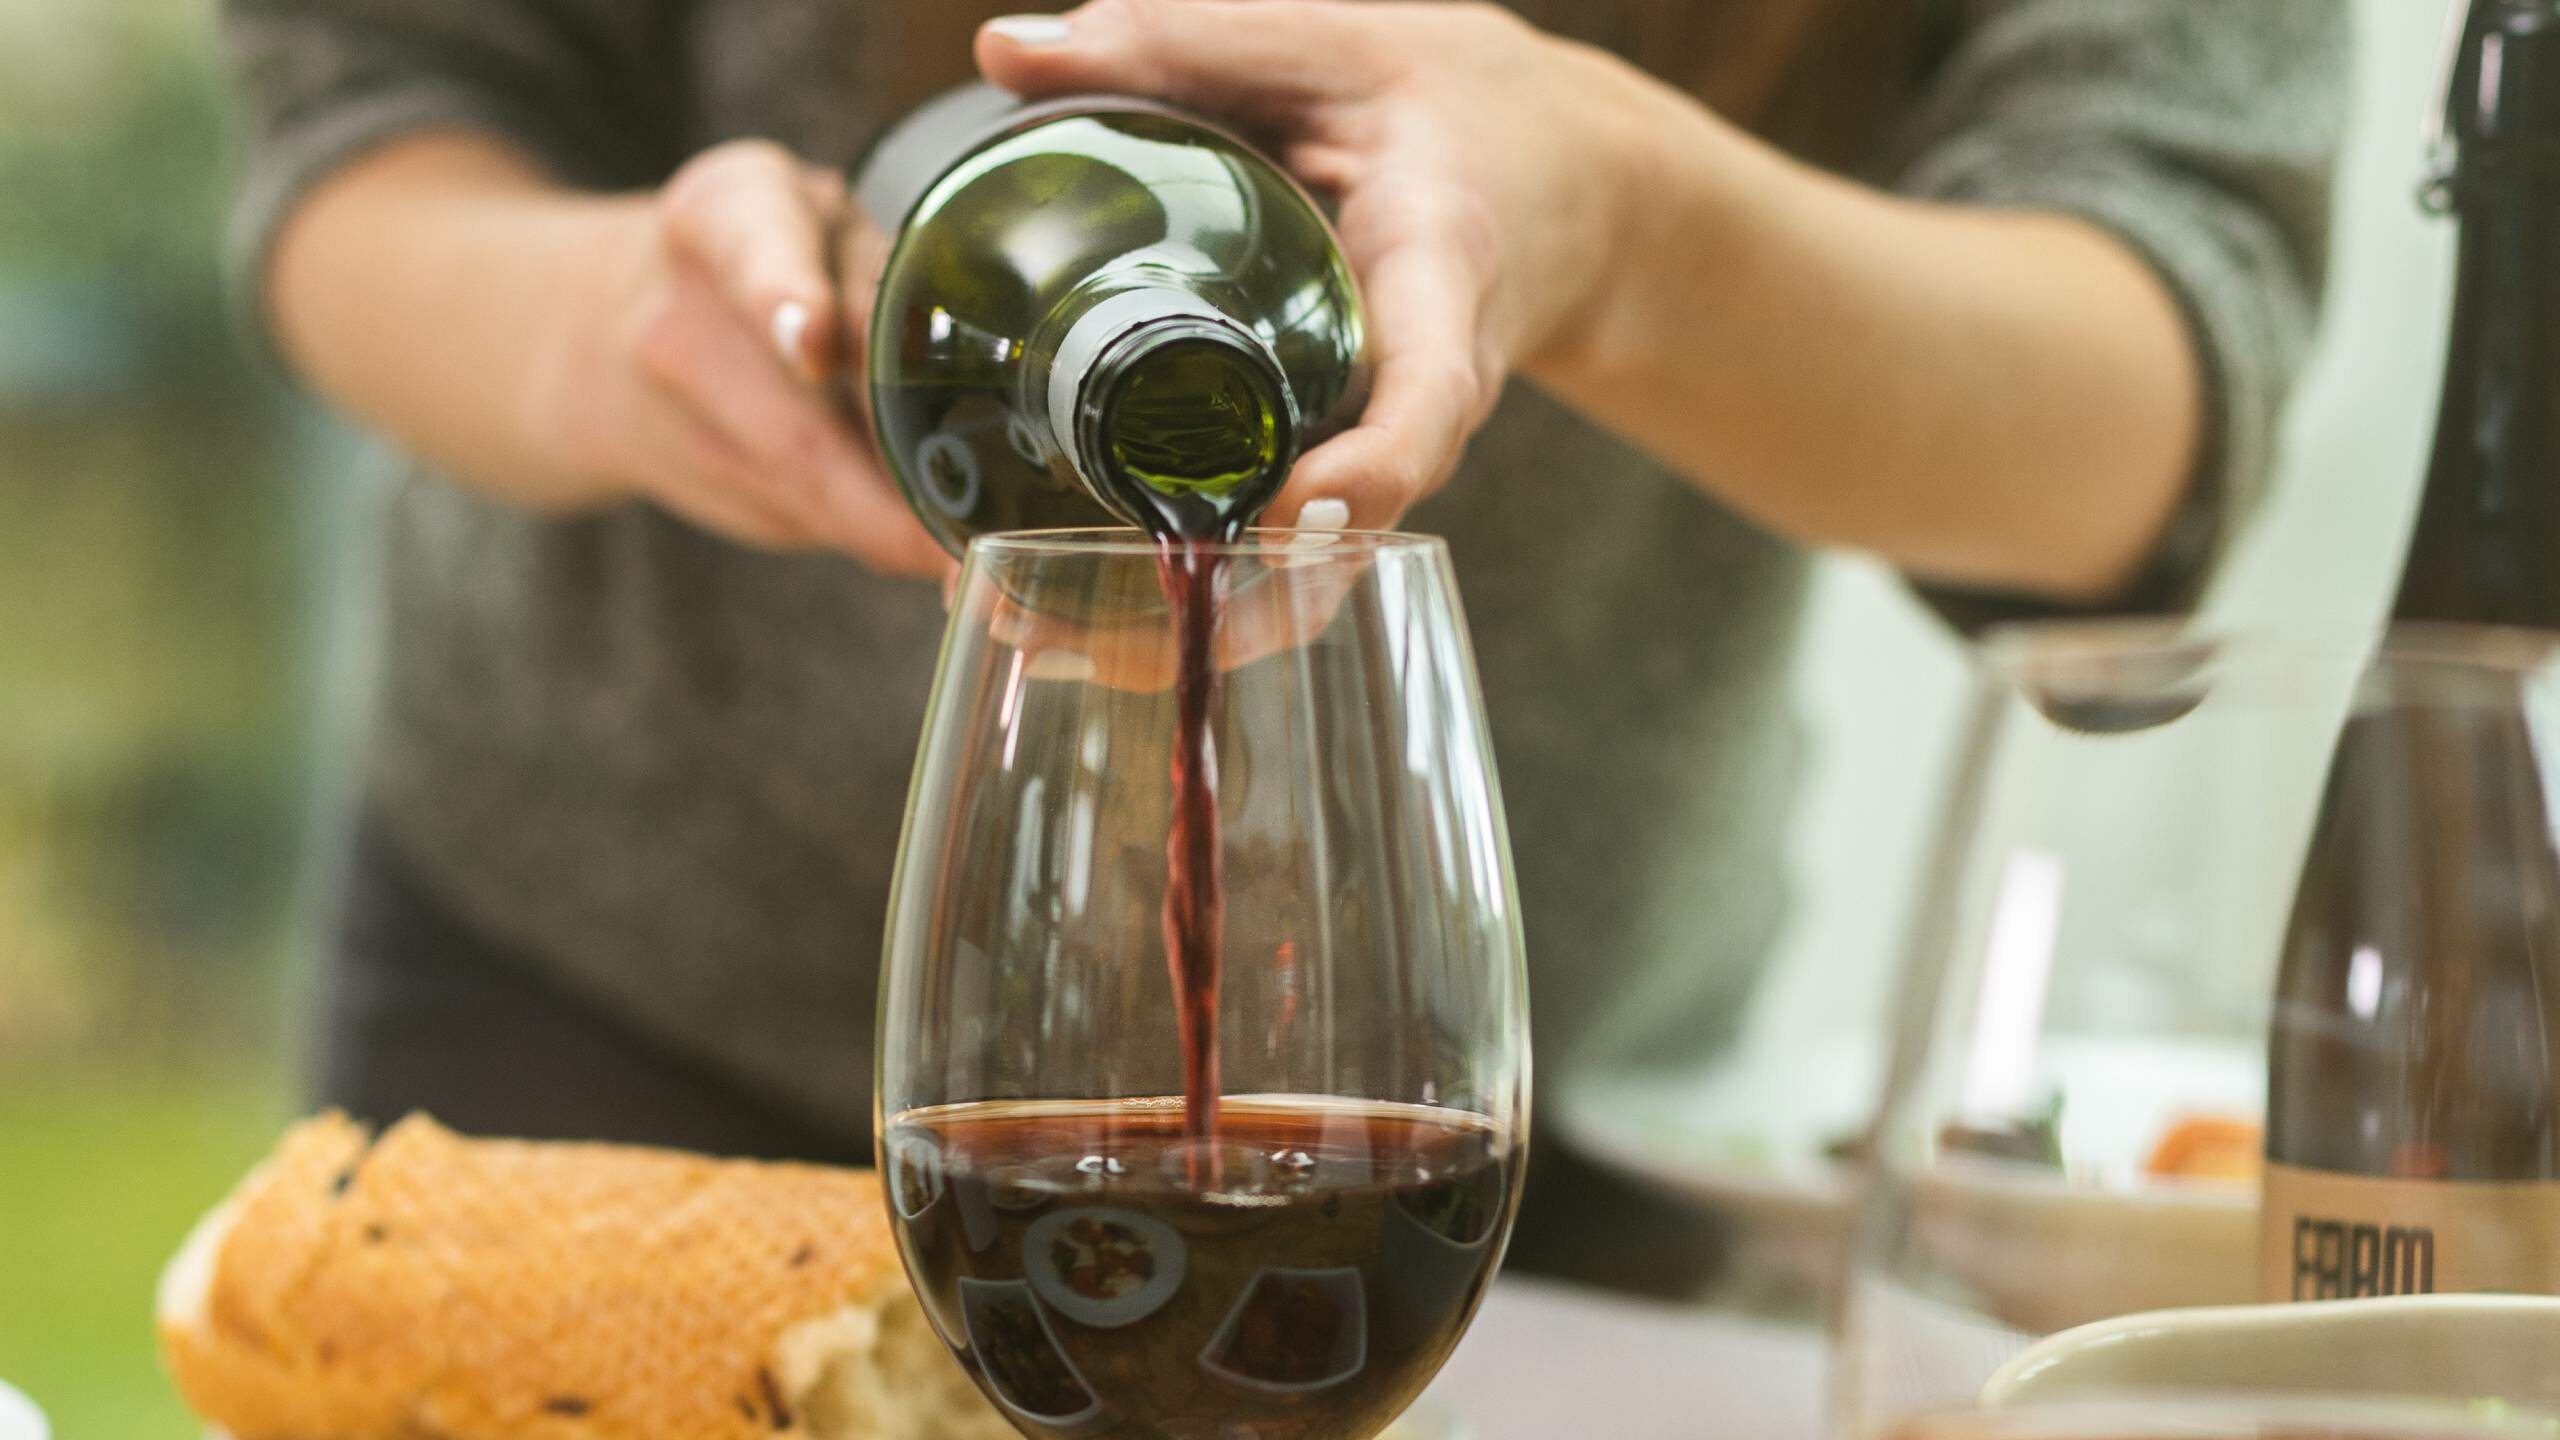 How to choose the best red wine glass for every occasion